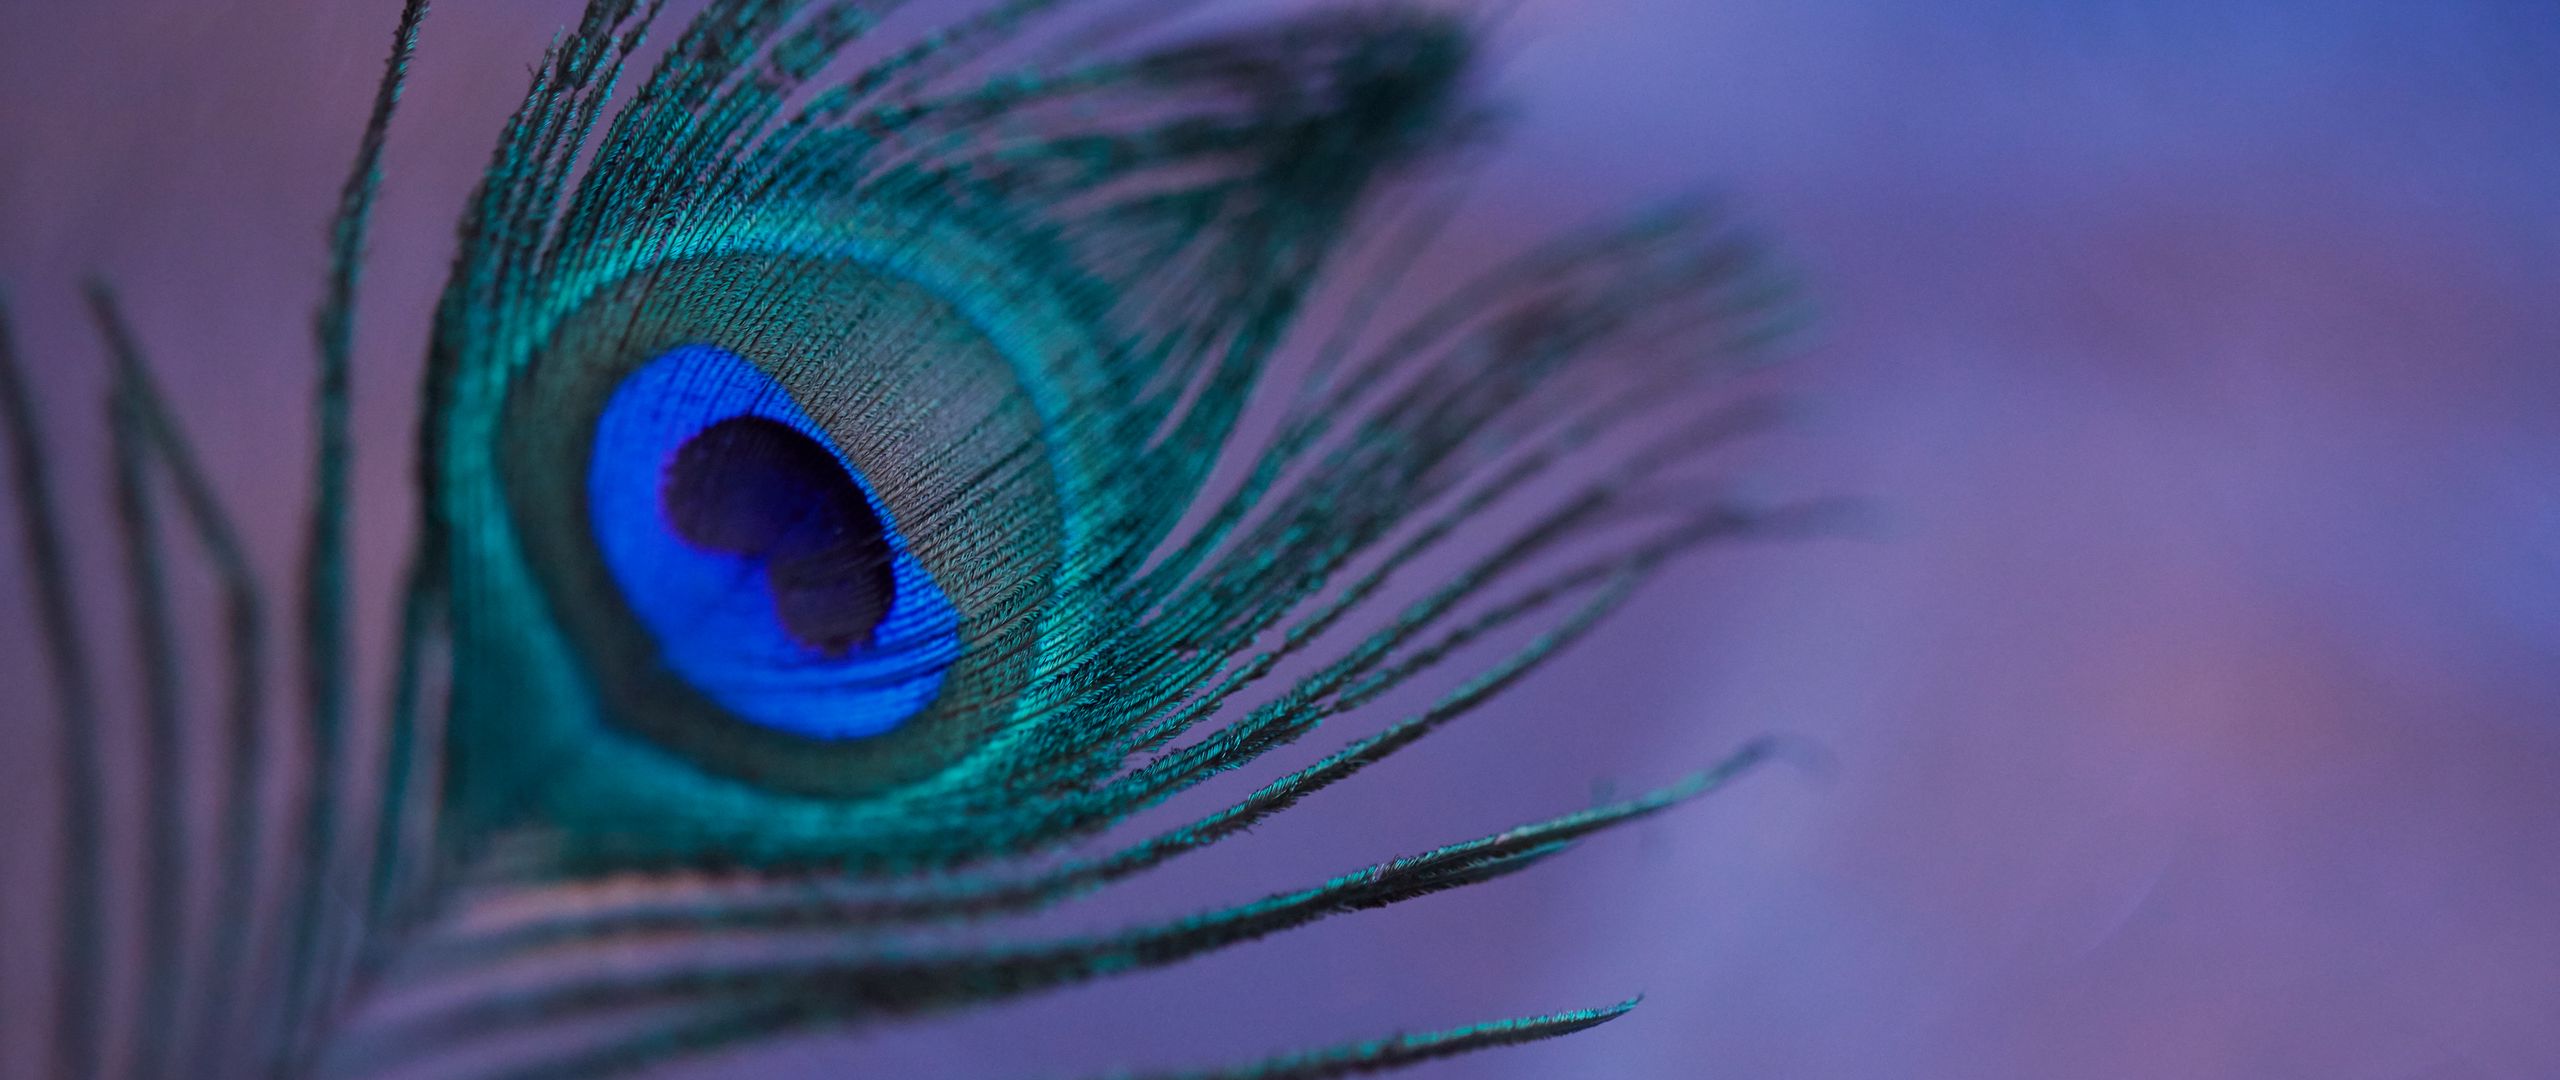 Download wallpaper 2560x1080 peacock feather, feather, colorful, macro dual  wide 1080p hd background